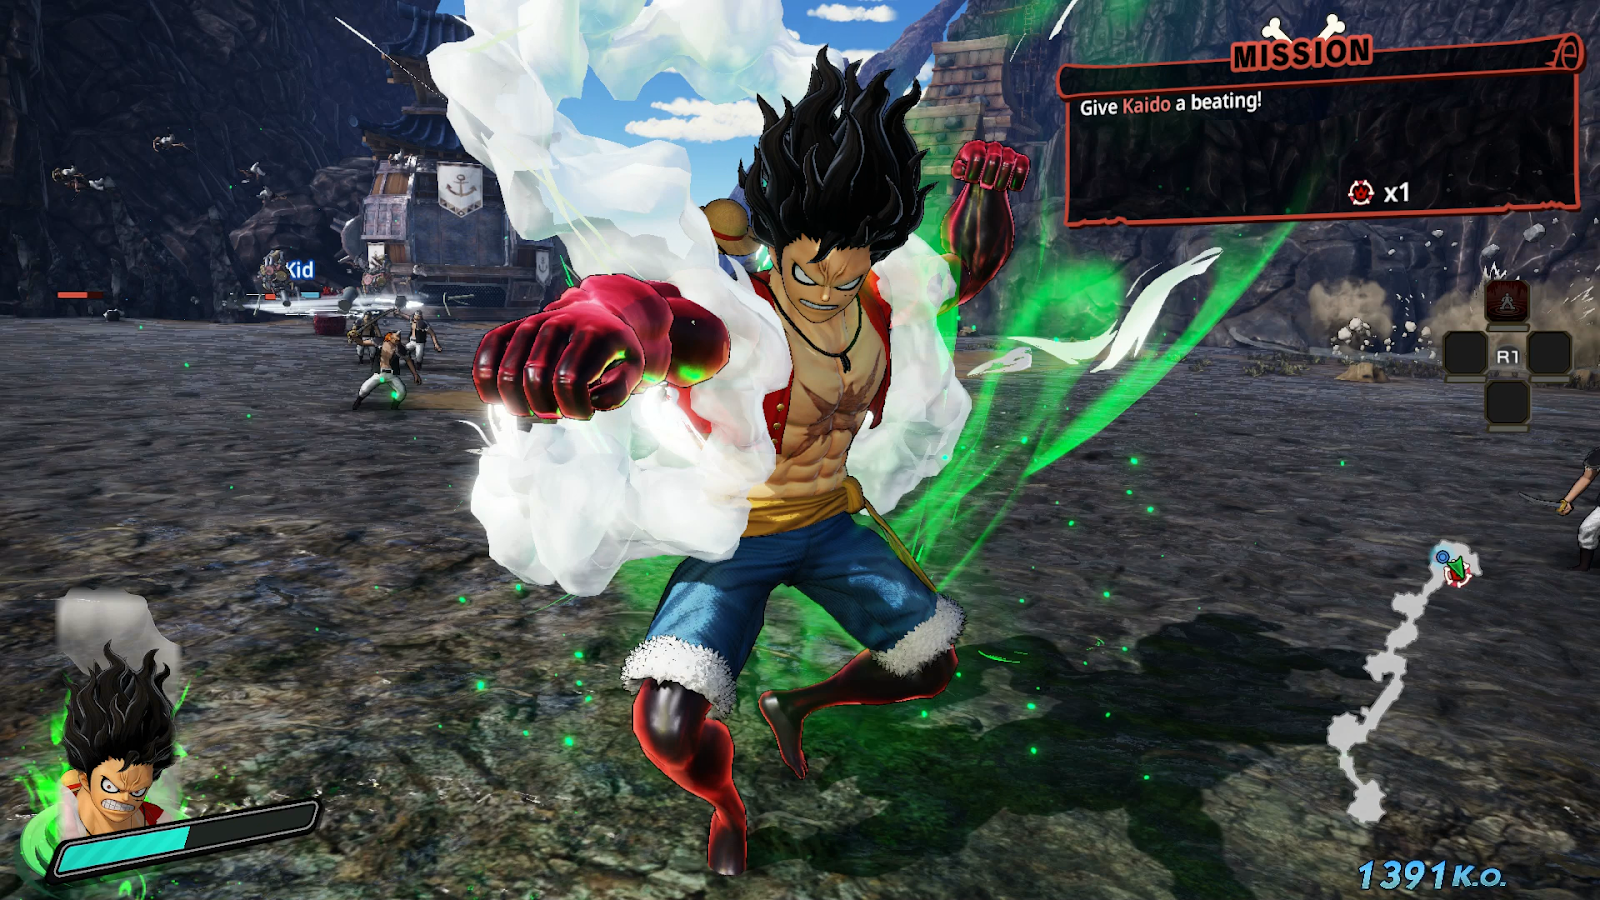 One Piece Pirate Warriors 4 Tips and Tricks - Rice Digital